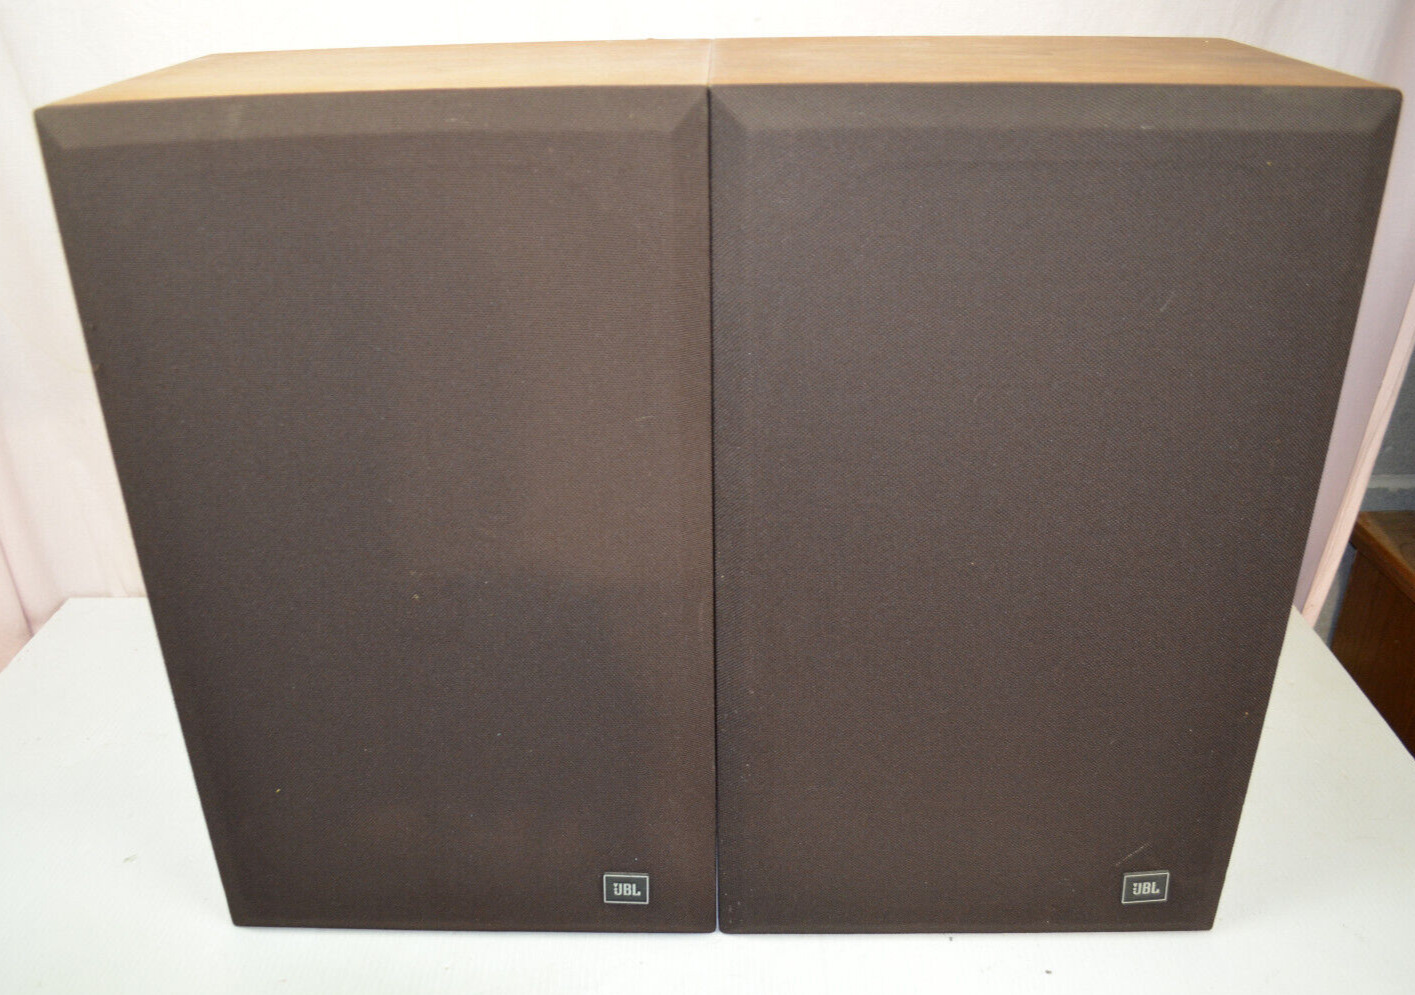 2 JBL L19 Speakers working sounds great 1 pair